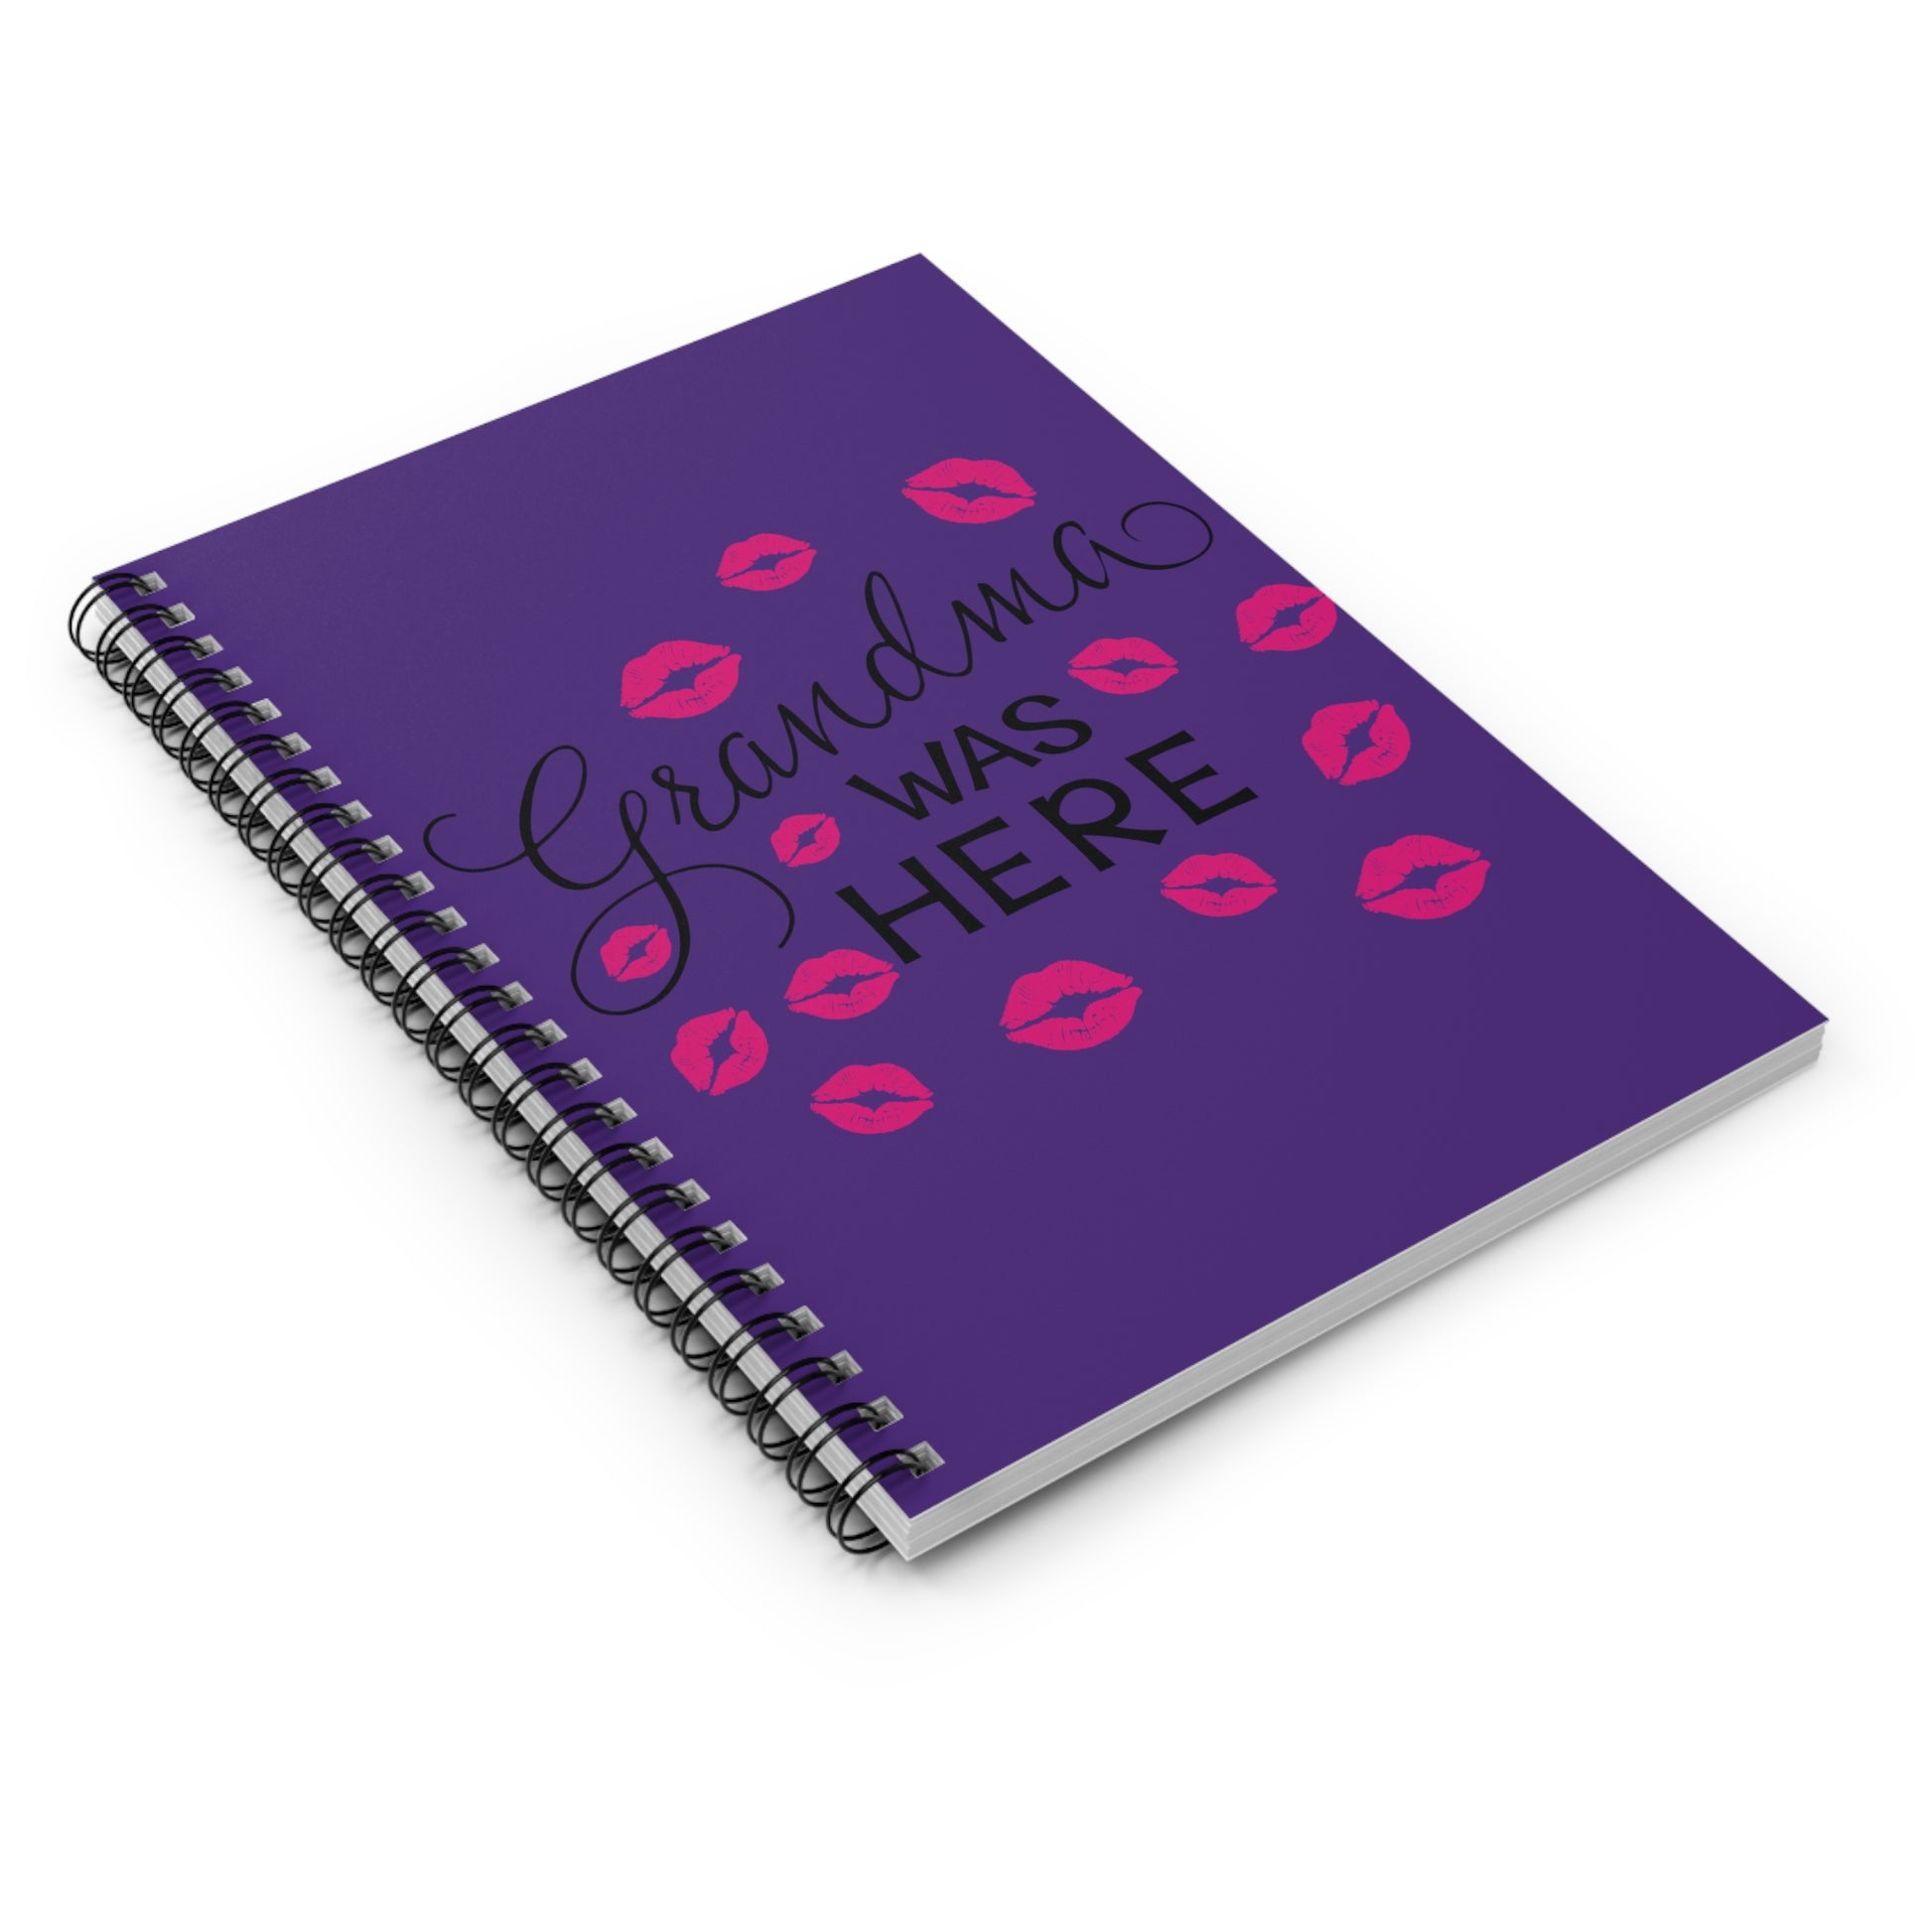 Grandma Was Here: Spiral Notebook - Log Books - Journals - Diaries - and More Custom Printed by TheGlassyLass